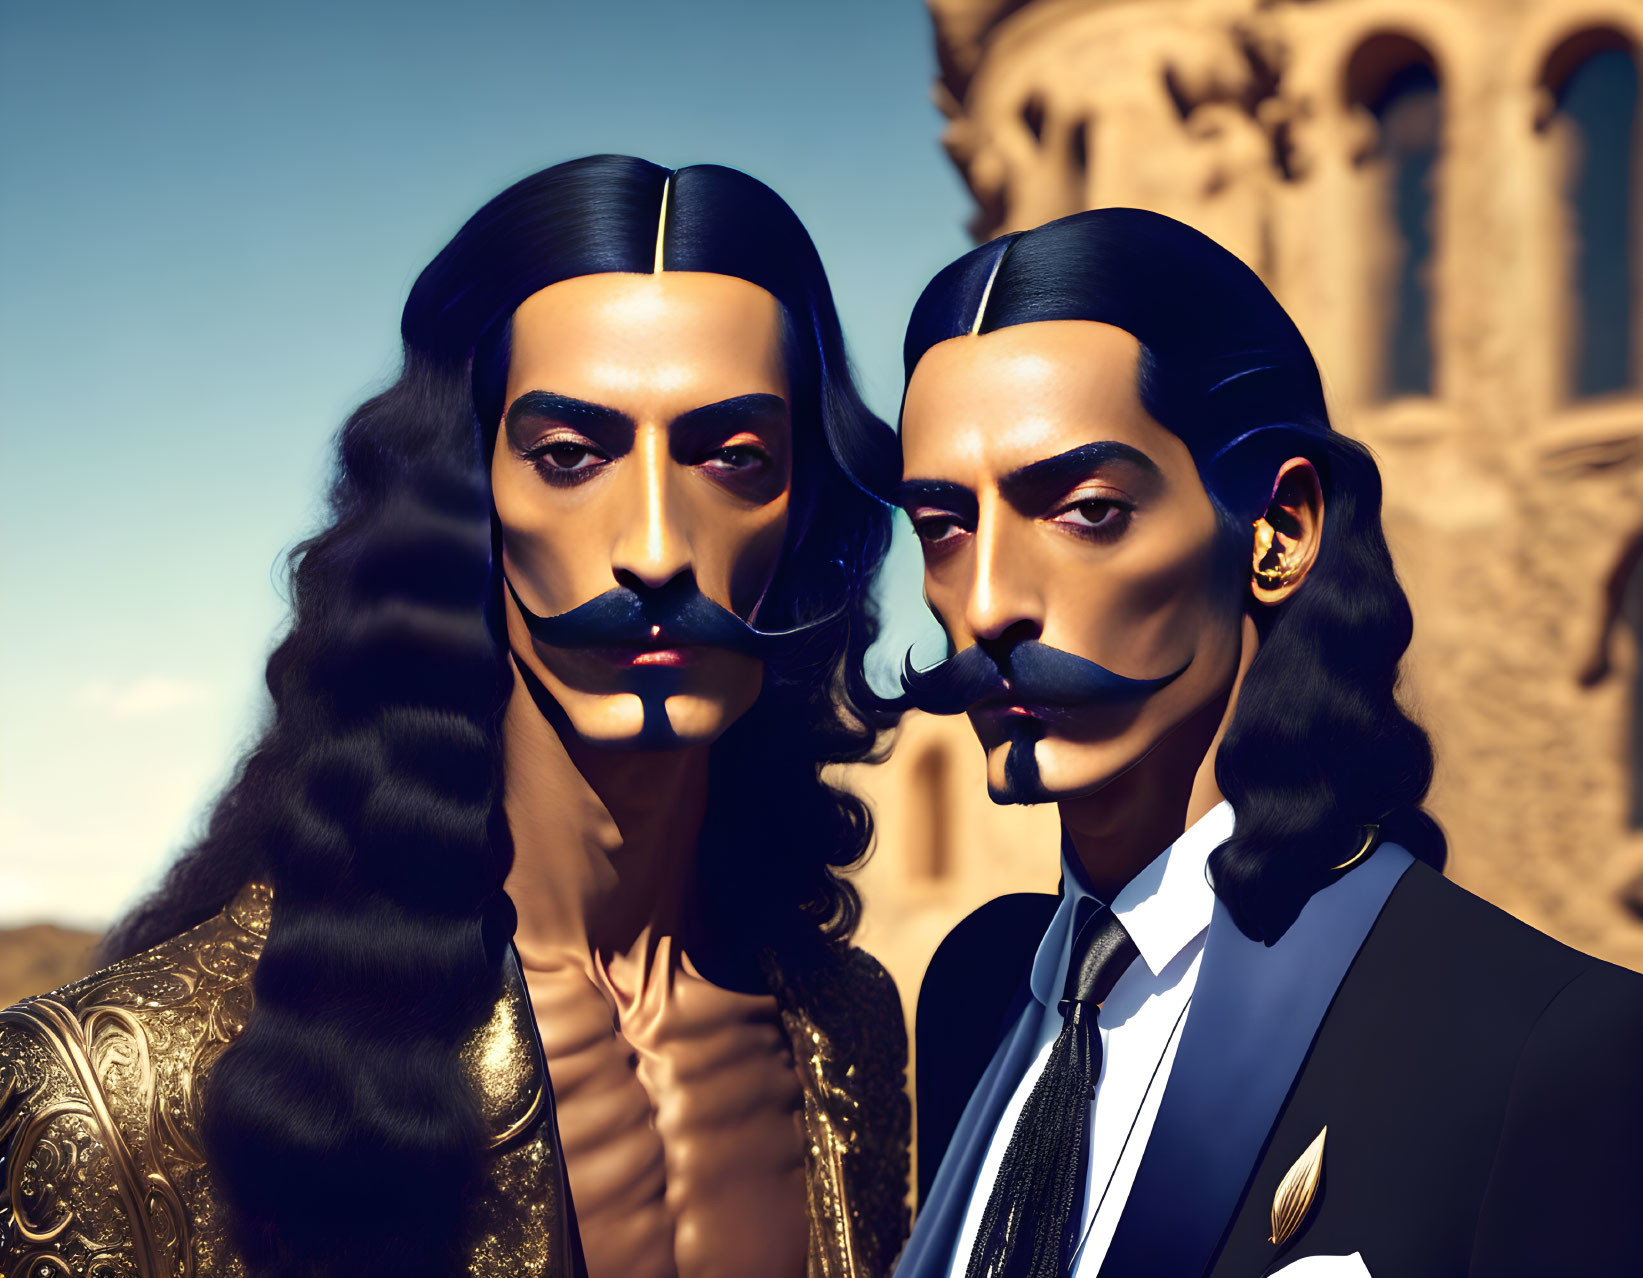 The Dali Brothers 14